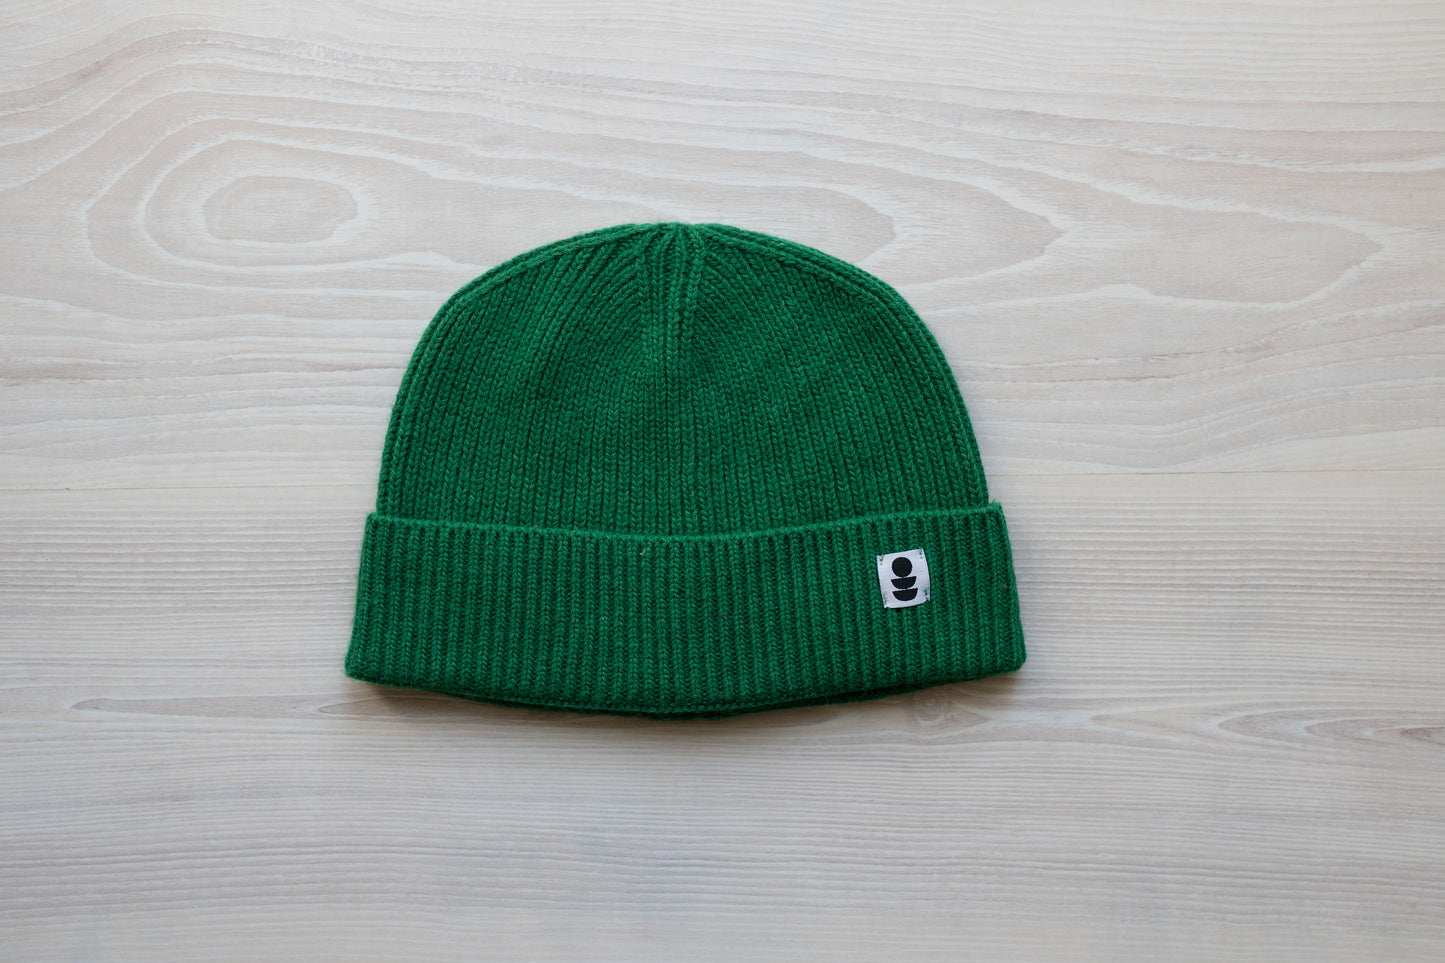 Light Weight Beanie made from 100% Recycled Yarn